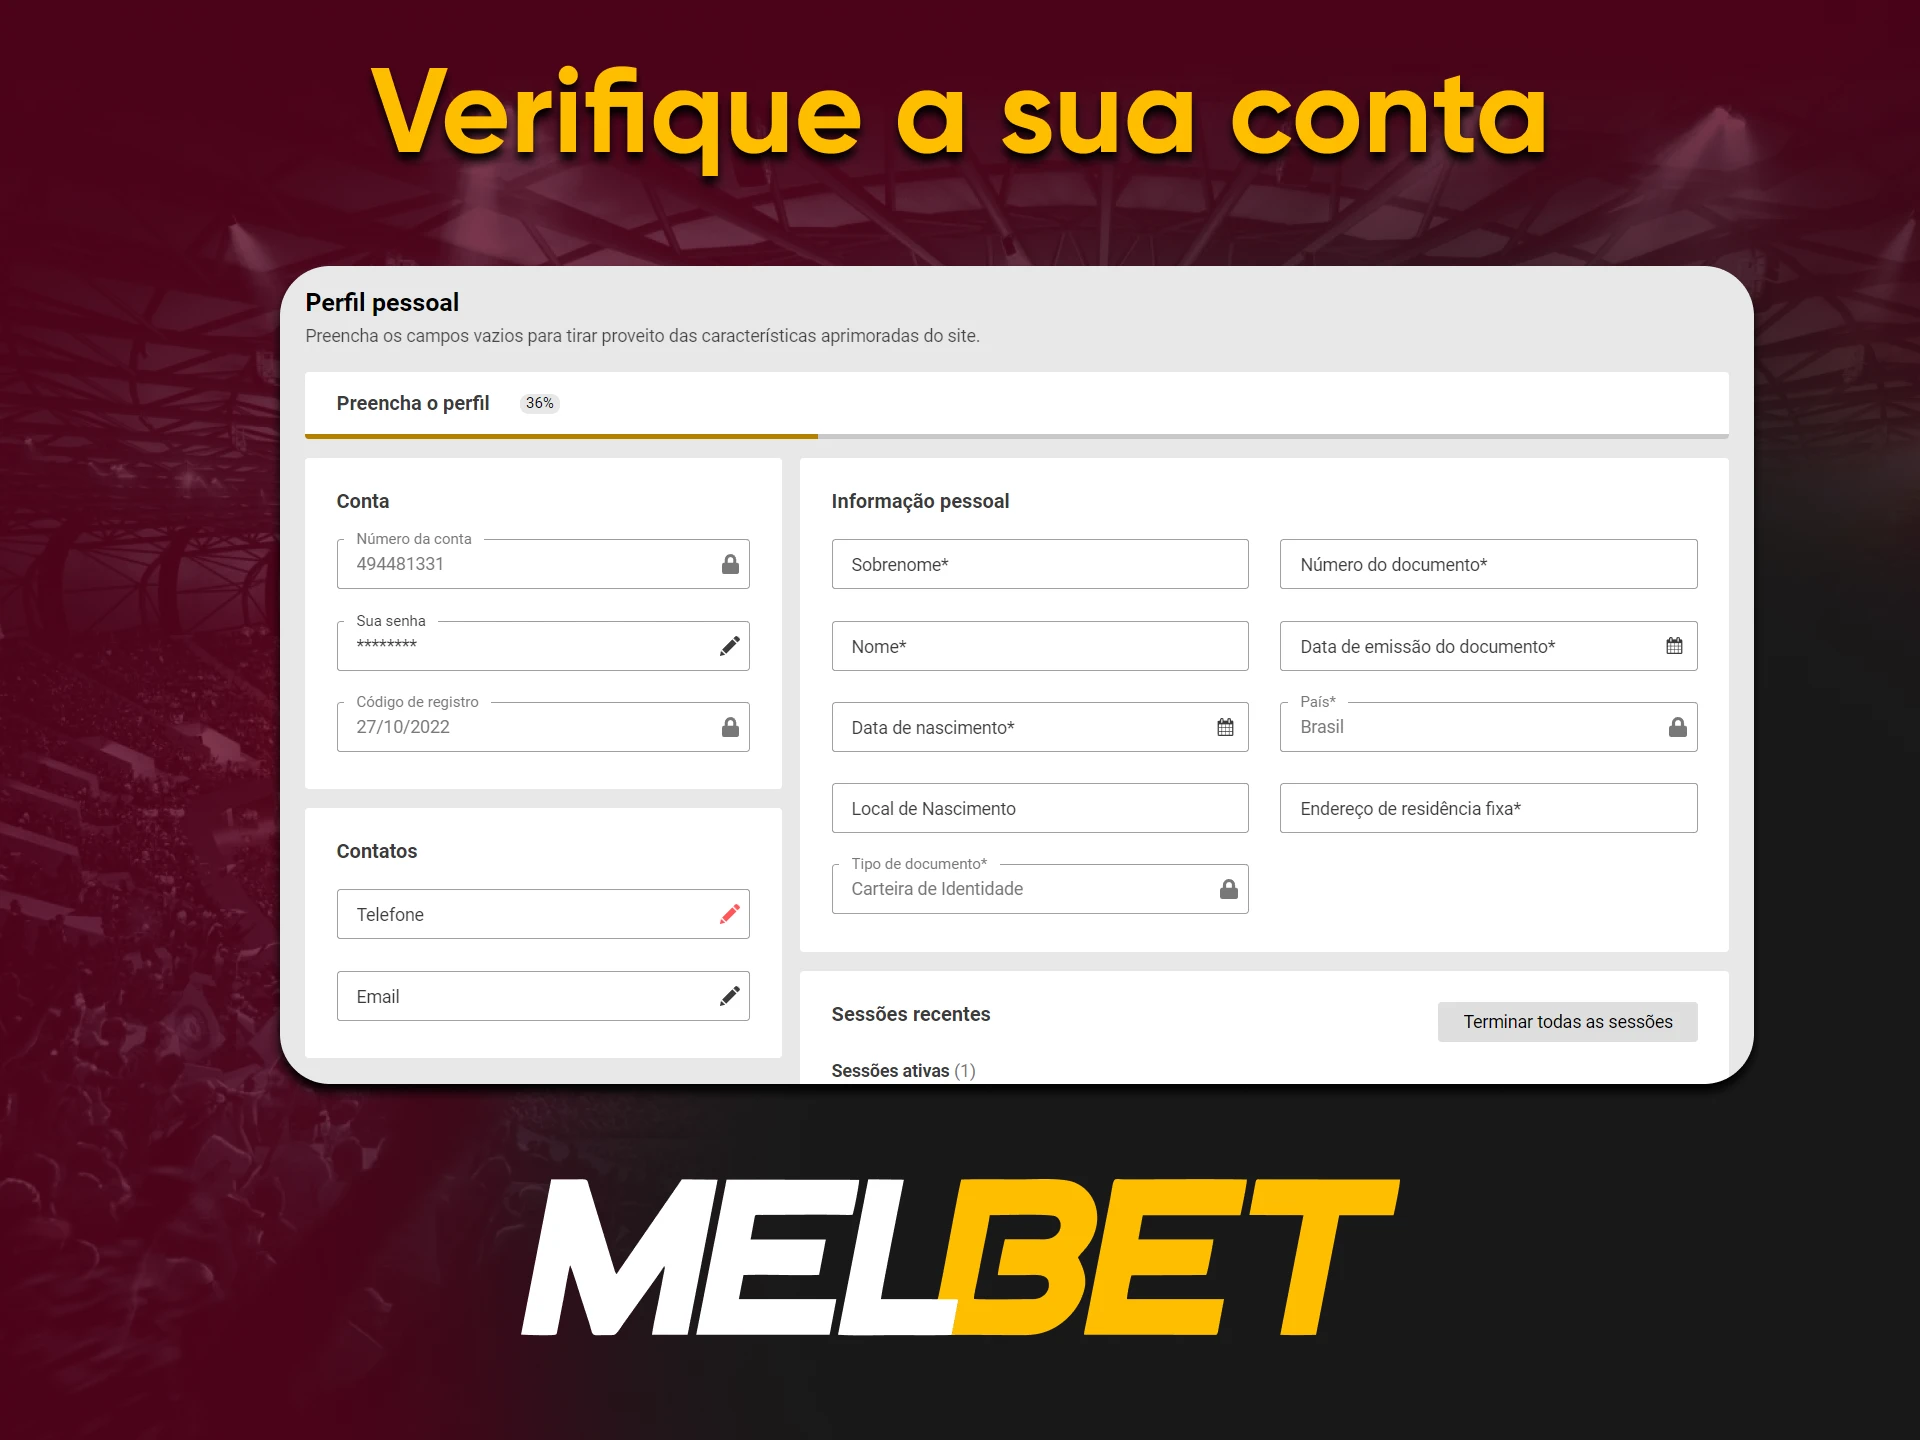 The Melbet website requires personal data verification.